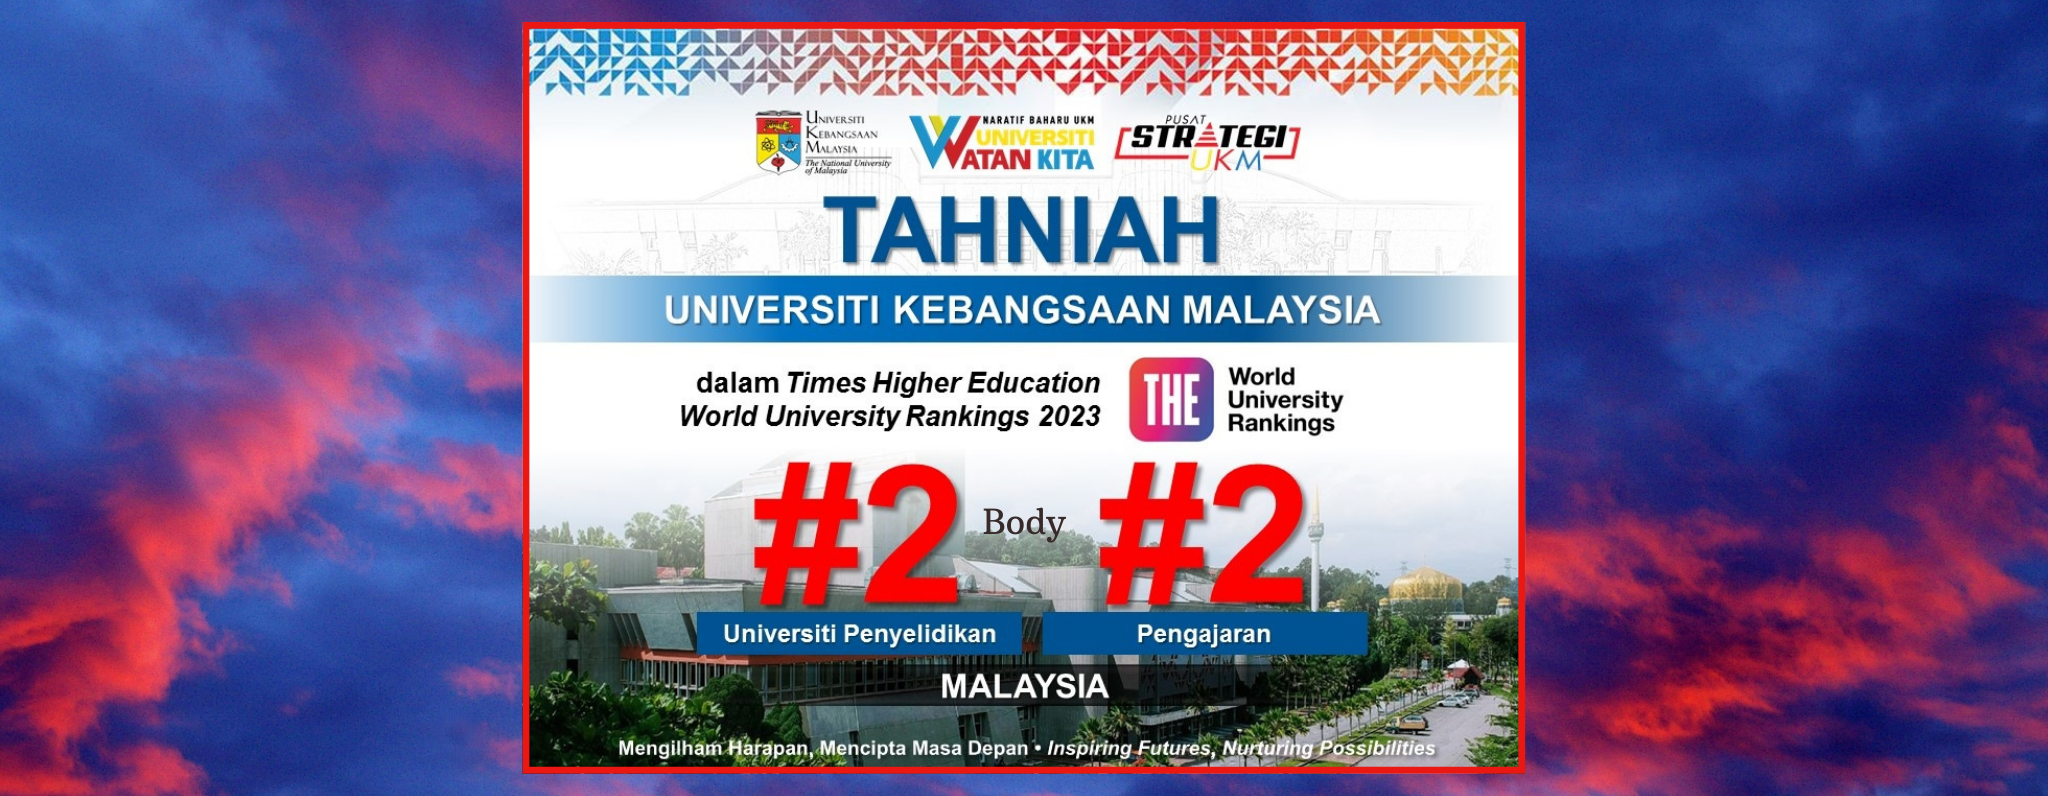 Well done UKM for rising your ranking this year!